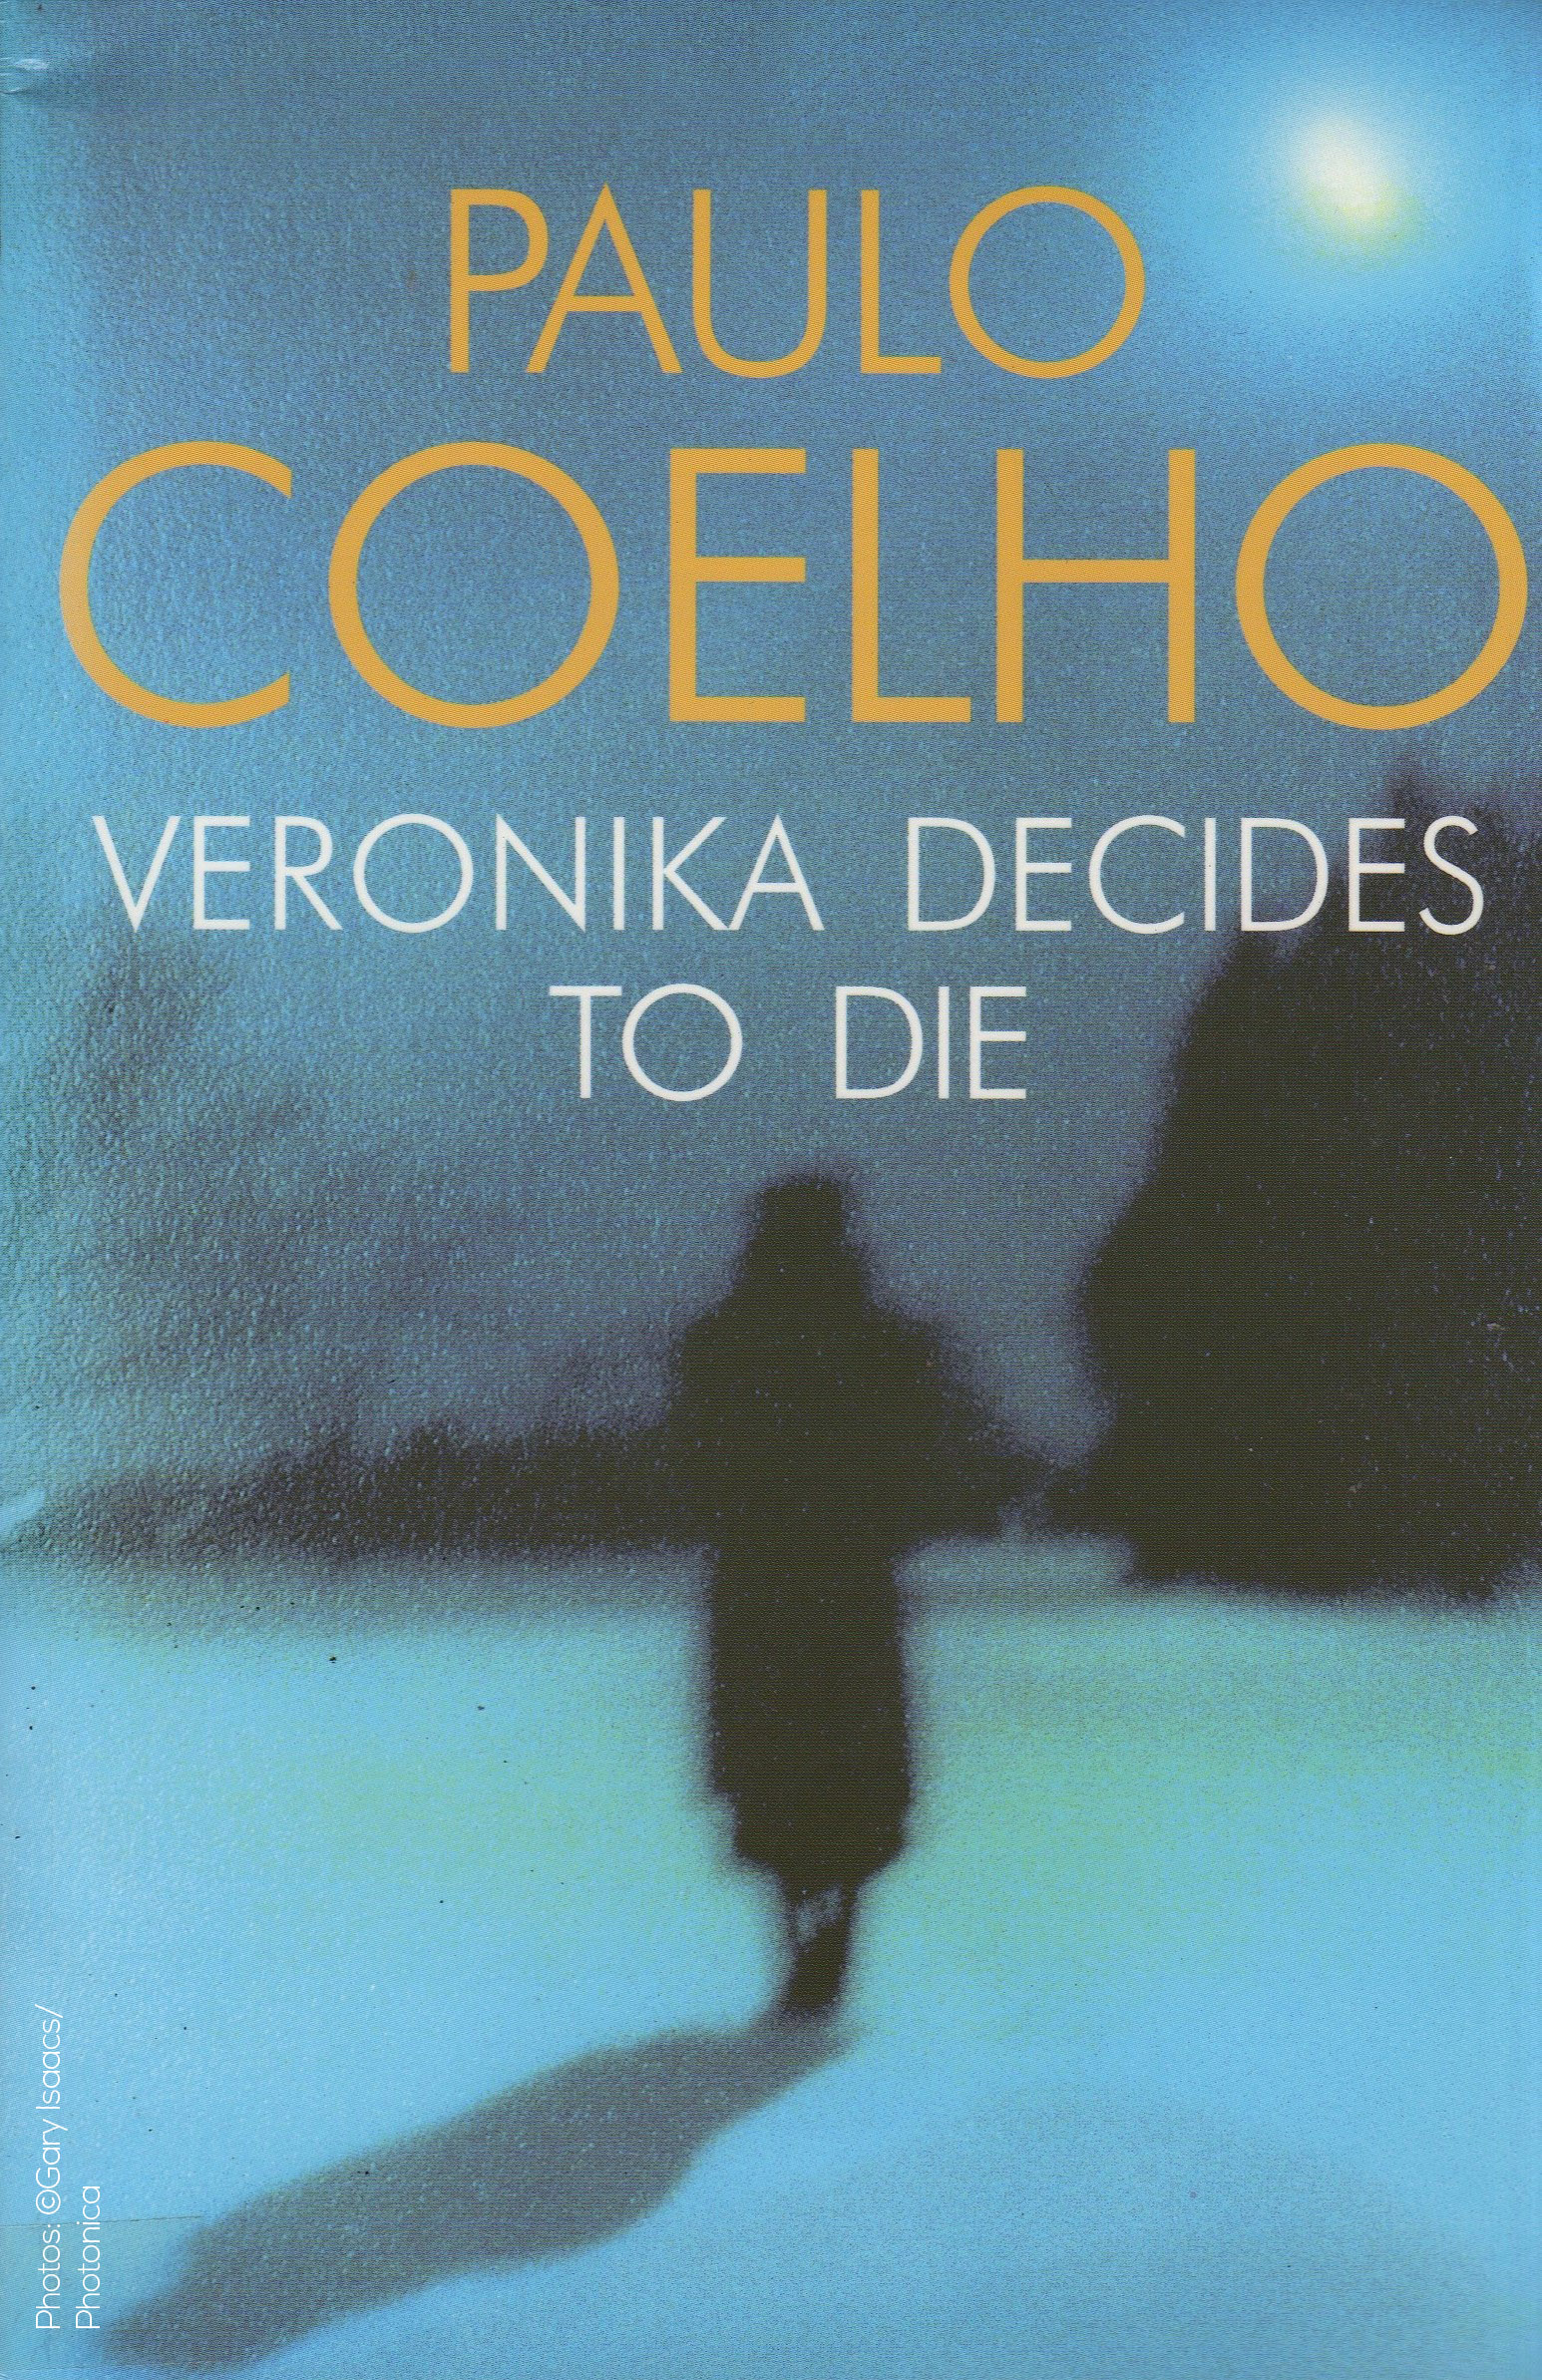 book review on veronika decides to die